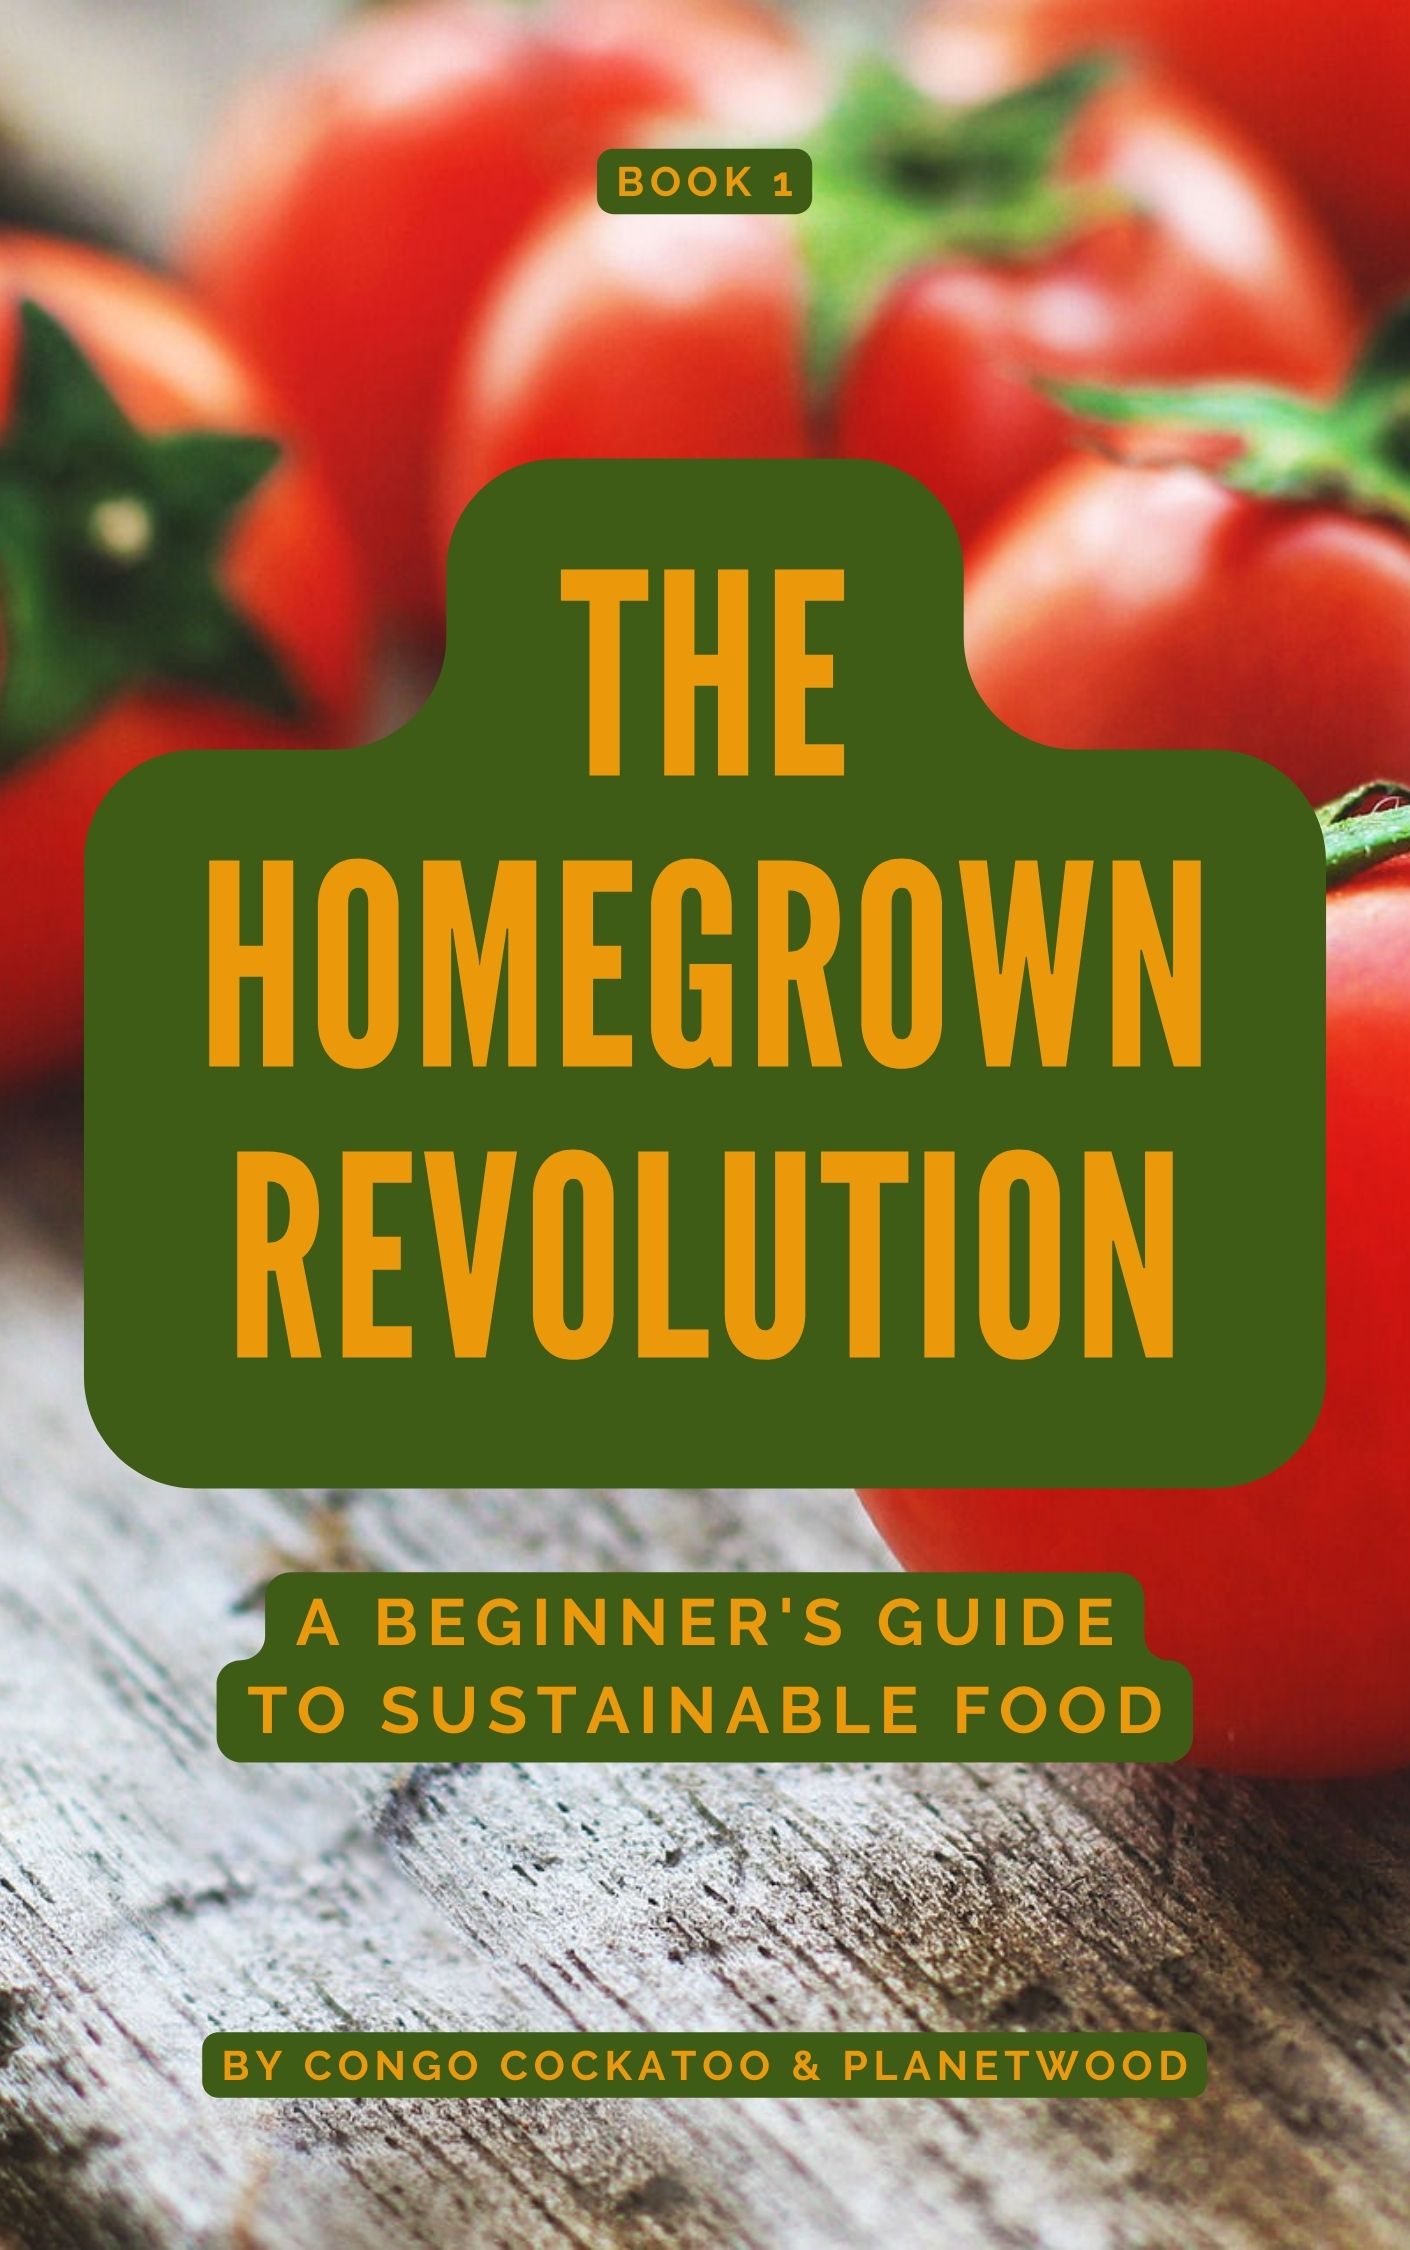 The Homegrown Revolution: A Beginner's Guide to Sustainable Food